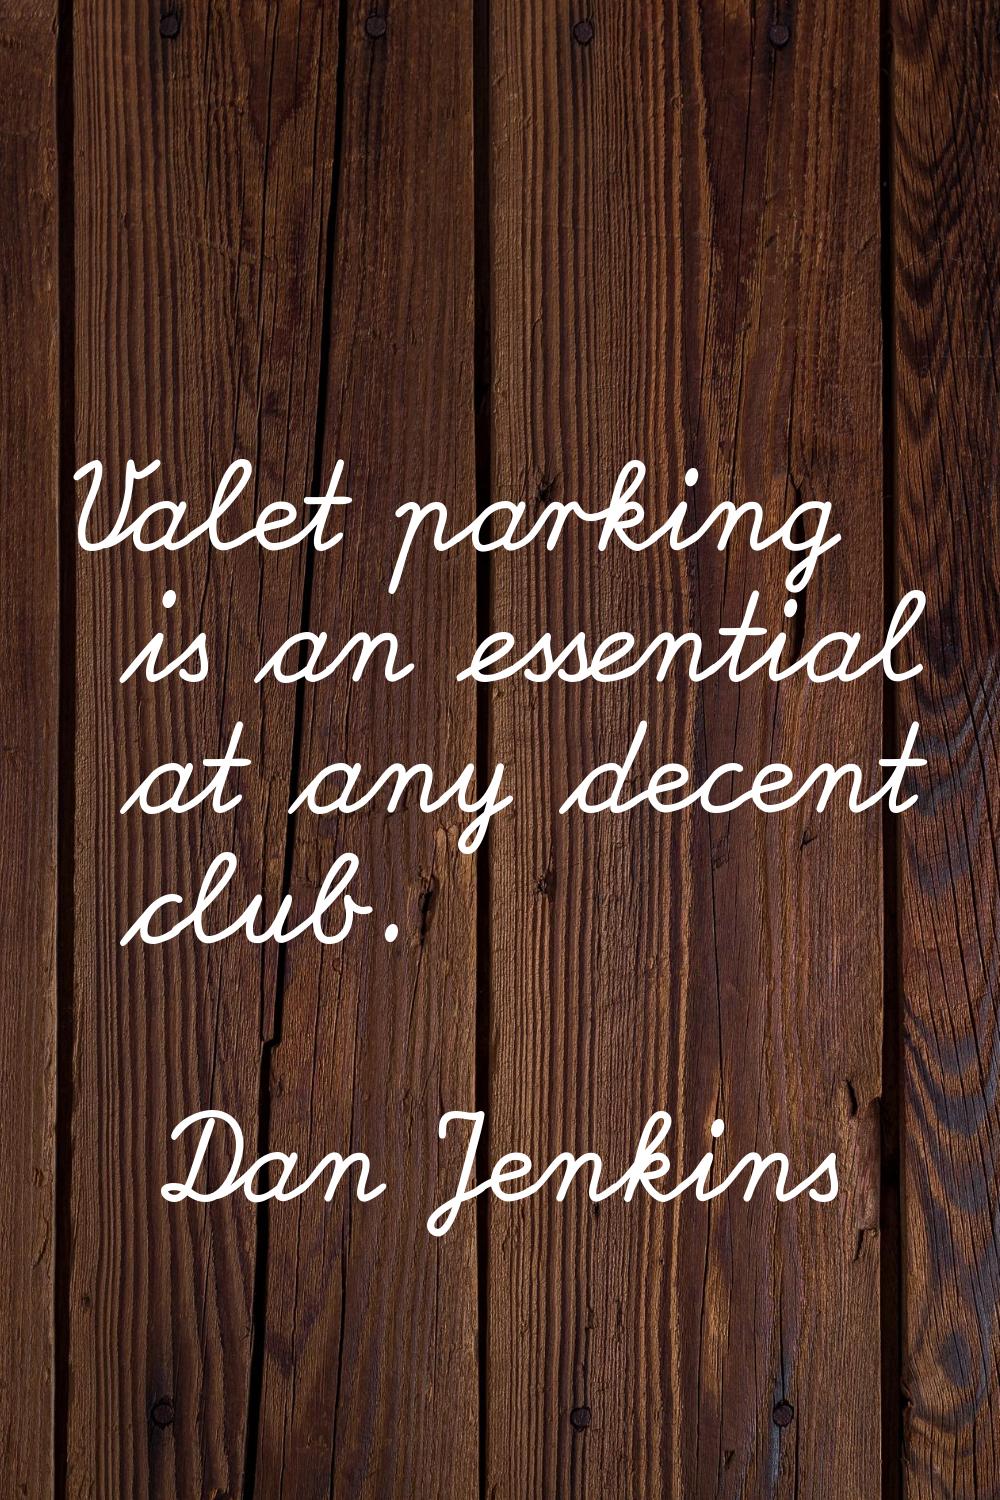 Valet parking is an essential at any decent club.